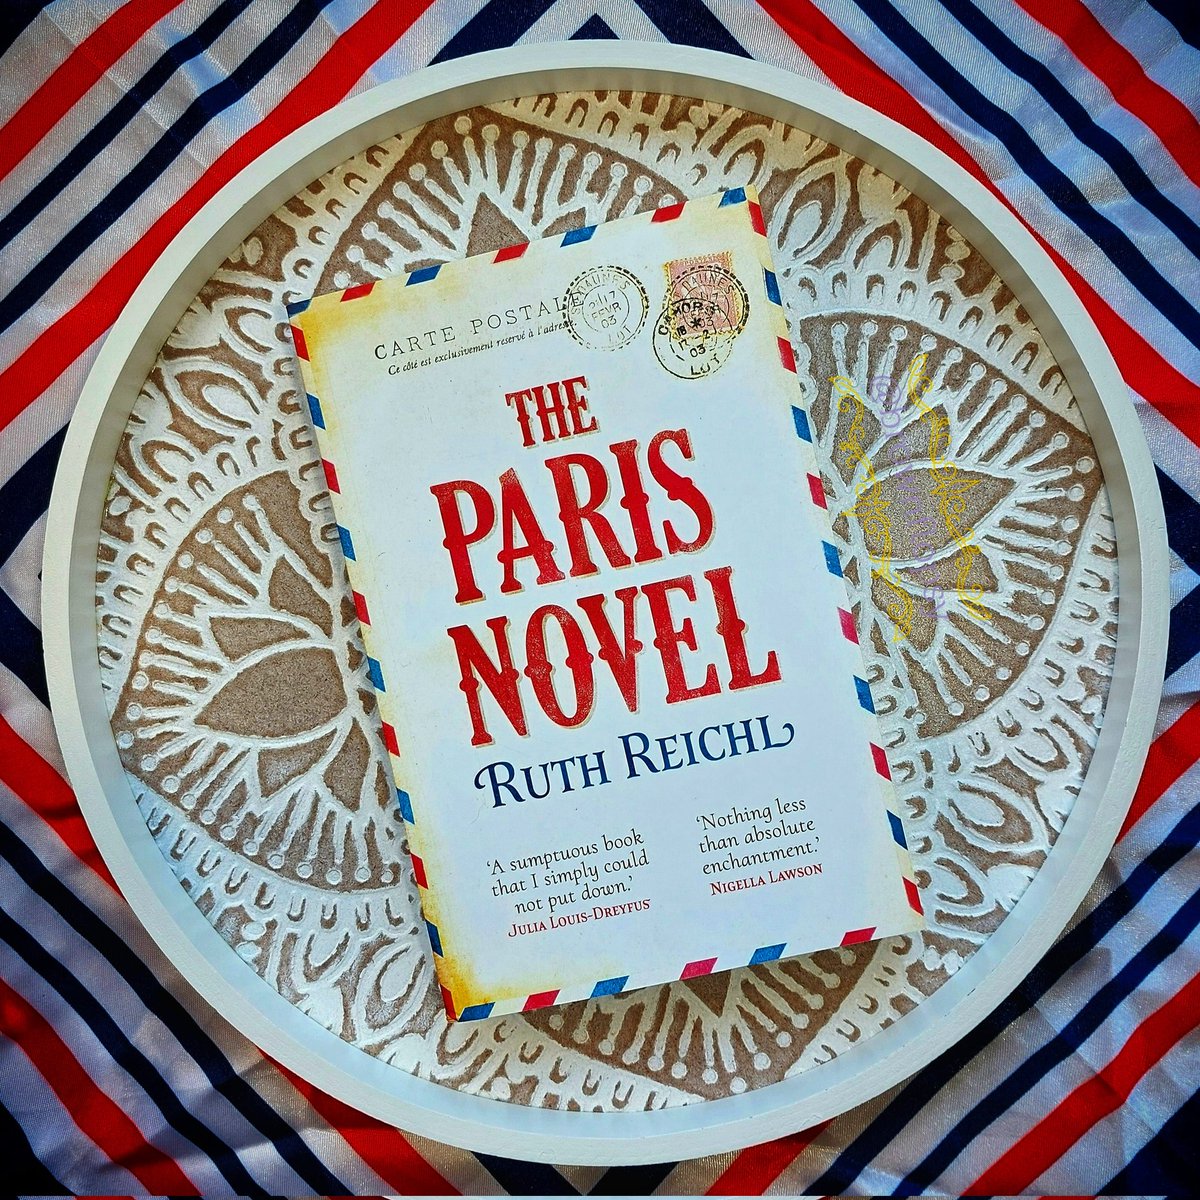 Welcome to my #FirstLinesFriday review of the utterly enchanting #TheParisNovel by @ruthreichl Out now from #MagpieBooks @OneworldNews ❤💙🥖🍷🖼👗 𝑺𝒉𝒆 𝒏𝒆𝒗𝒆𝒓 𝒄𝒂𝒍𝒍𝒆𝒅 𝒉𝒆𝒓 𝒎𝒐𝒕𝒉𝒆𝒓 𝑴𝒐𝒎 𝒐𝒓 𝑴𝒐𝒎𝒎𝒚 𝒐𝒓 𝒆𝒗𝒆𝒏 𝑴𝒐𝒕𝒉𝒆𝒓... brownflopsy.blogspot.com/2024/05/the-pa…